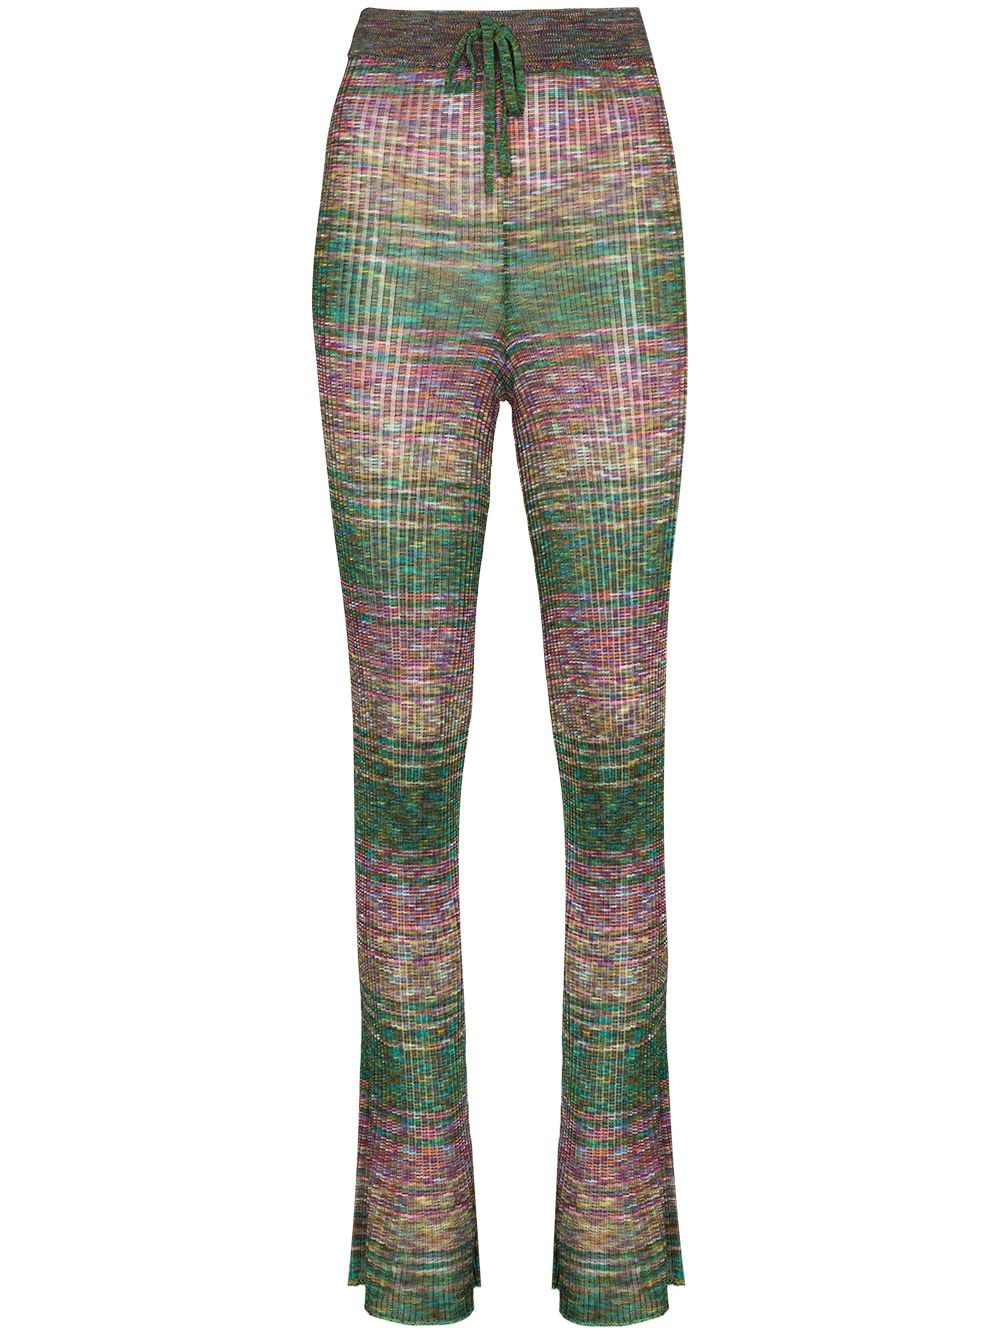 Marques'Almeida mélange-effect knitted trousers